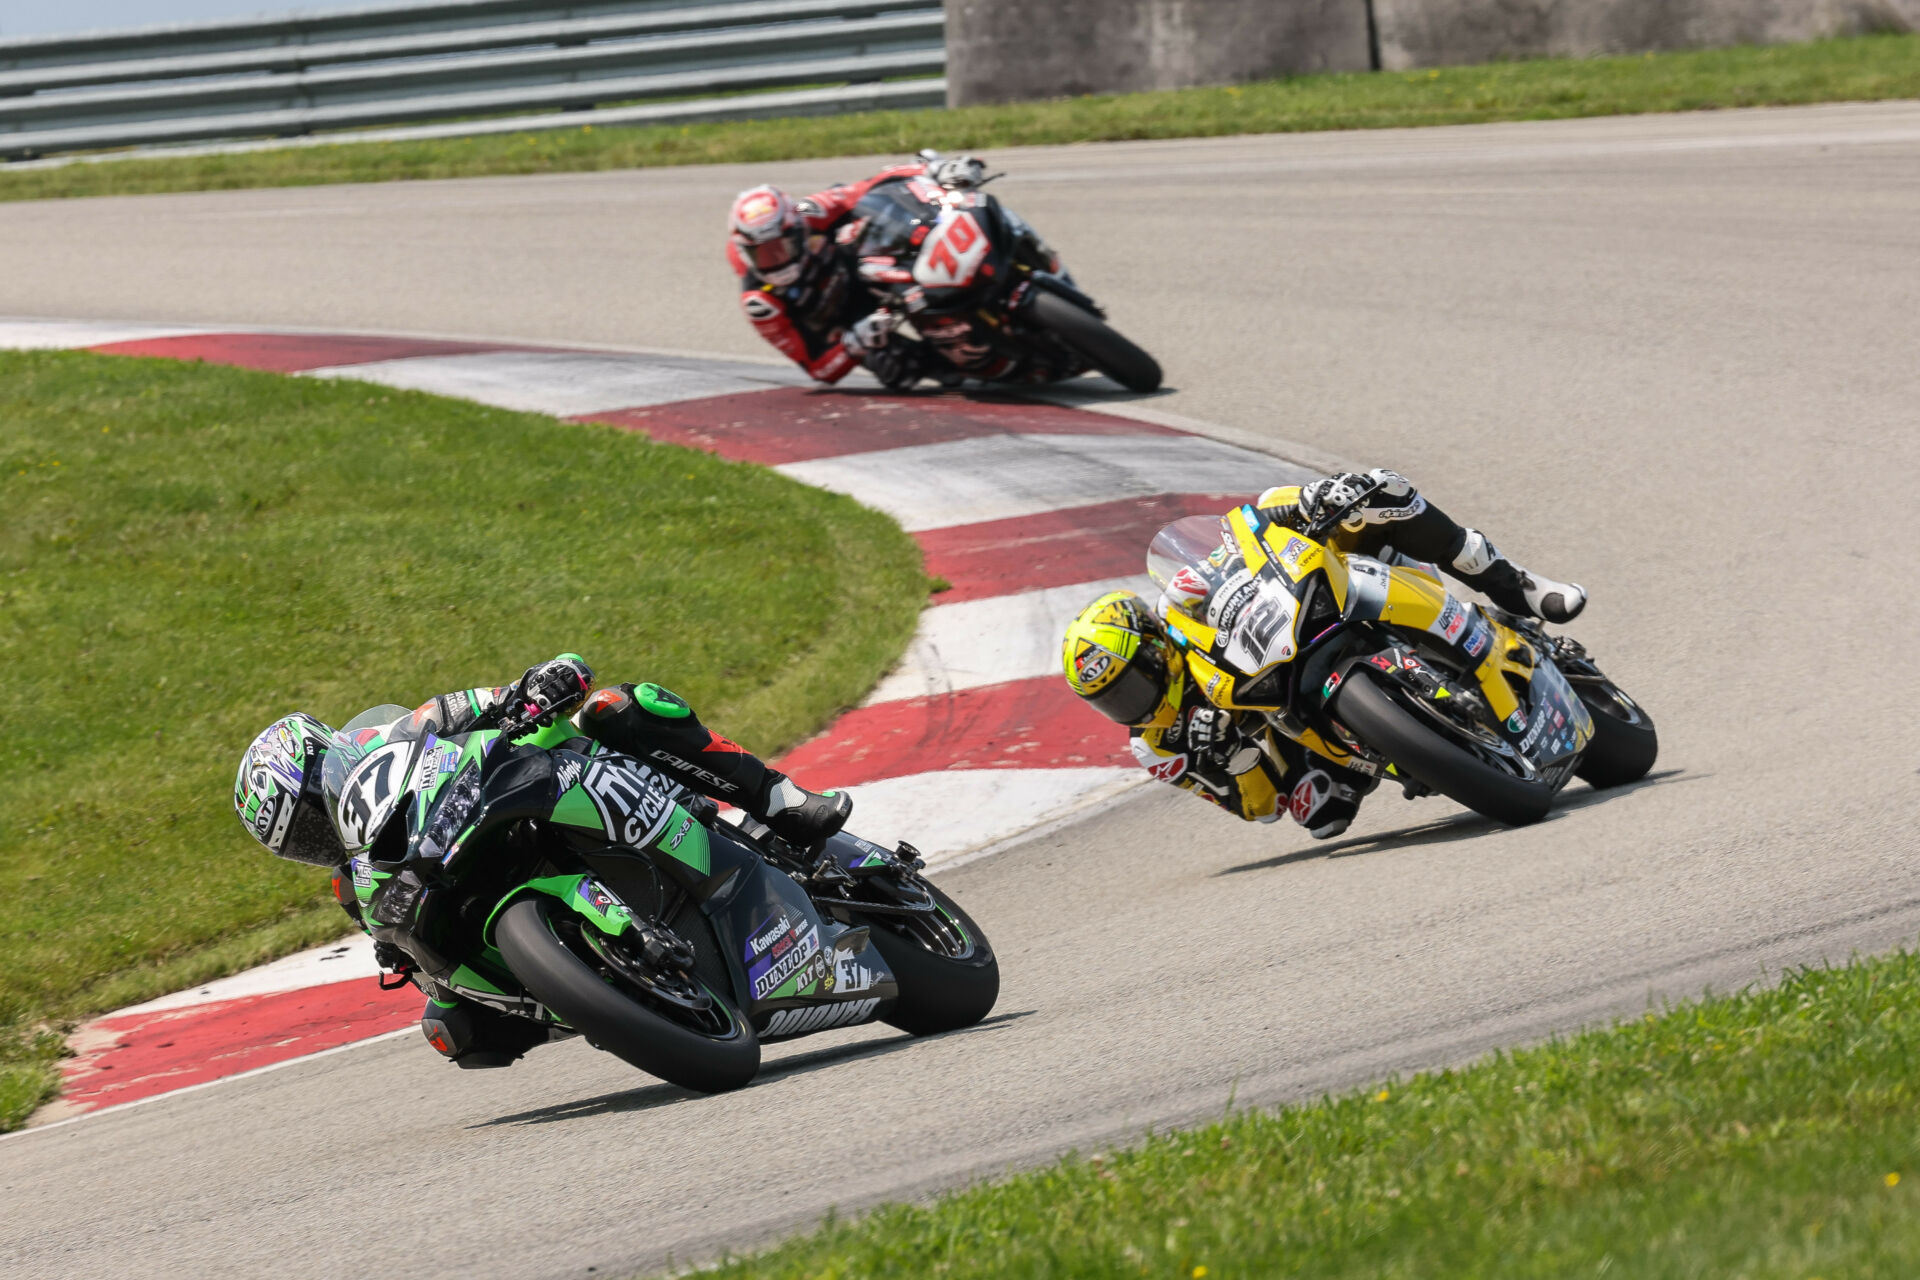 Stefano Mesa (37) leads Xavi Forés (12) and Tyler Scott (70) en route to winning Saturday's Supersport race. Photo by Brian J. Nelson.